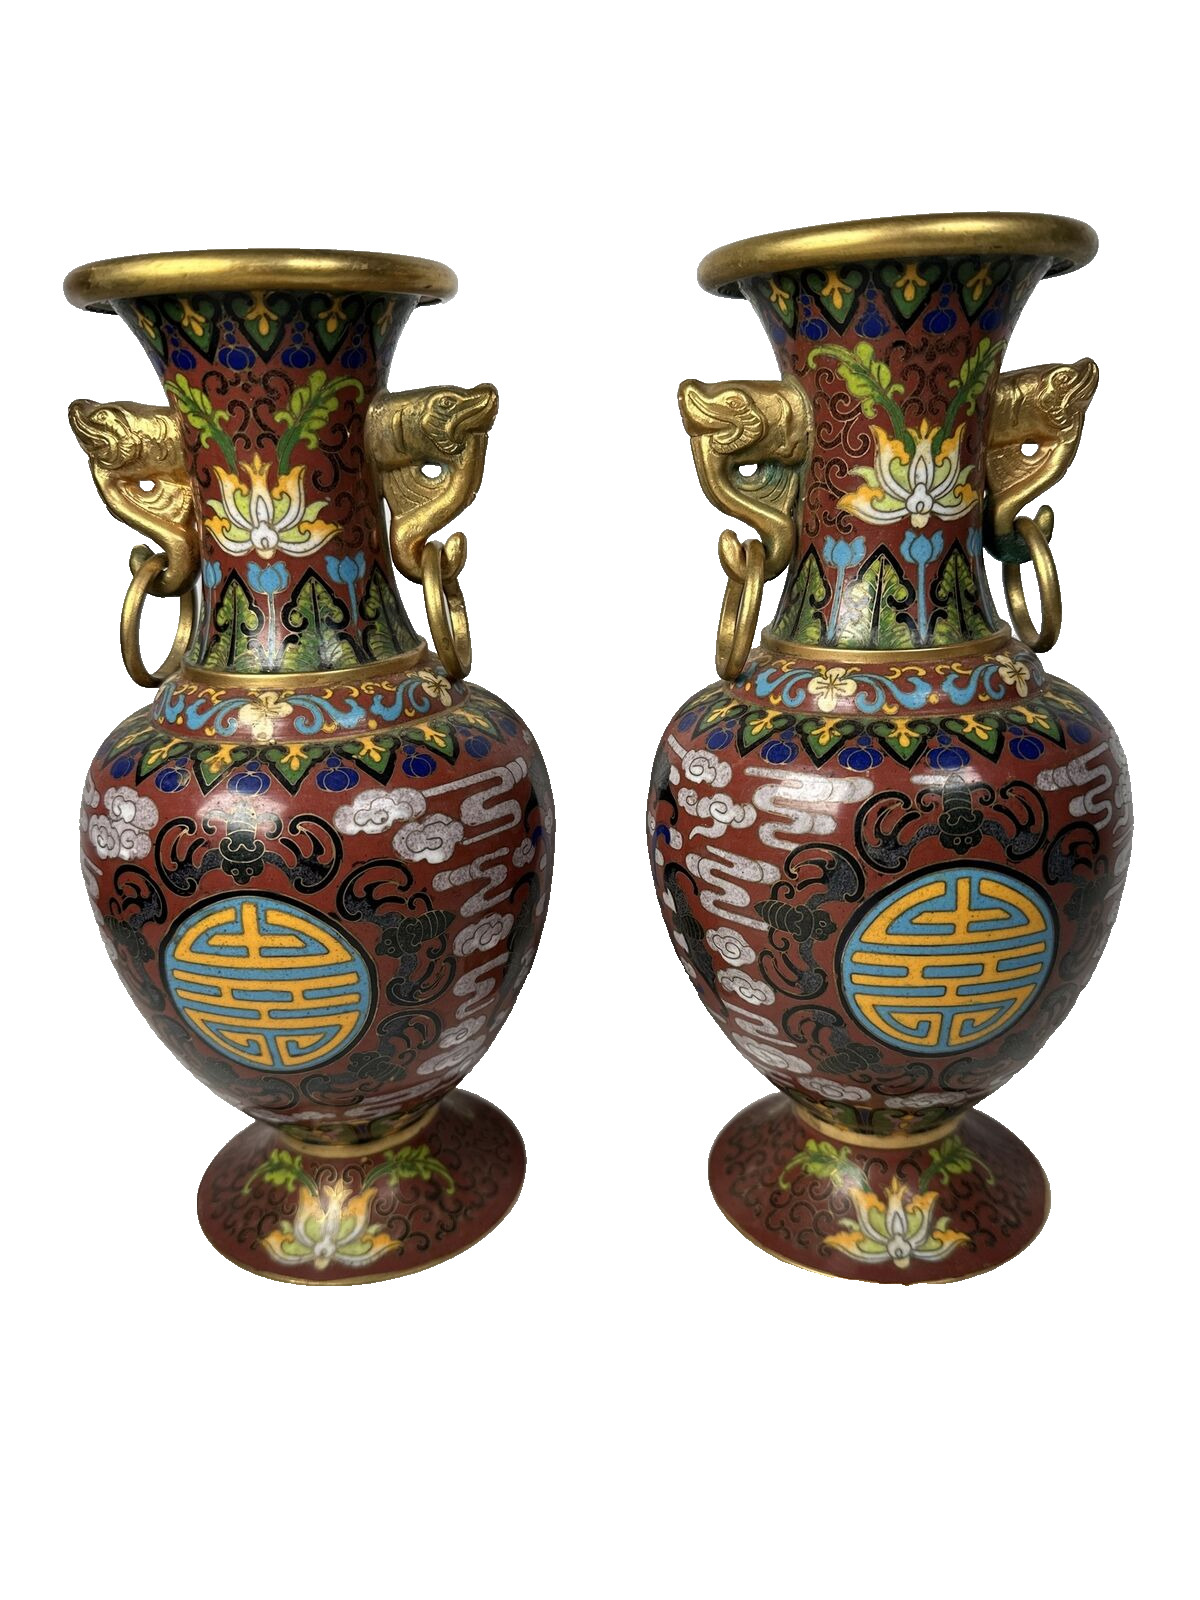 PAIR of Old Chinese CLOISSONE Vases Fine Yellow Red Blue Bats